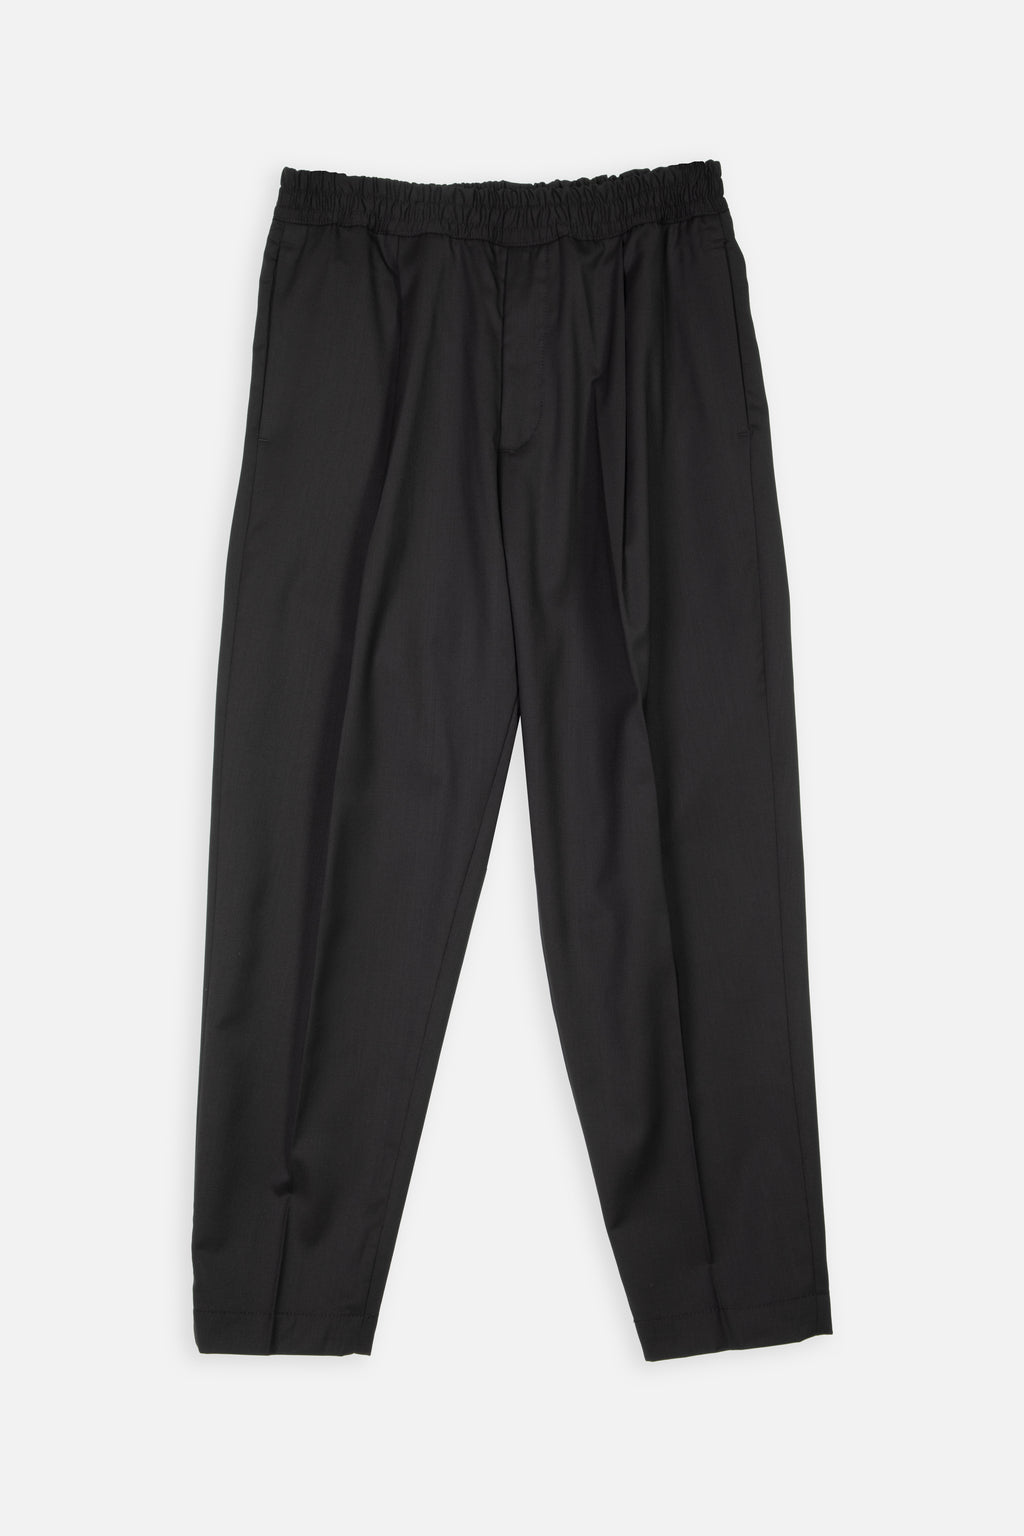 alt-image__Black-wool-tailored-pant-with-elastic-waistband---Savoys